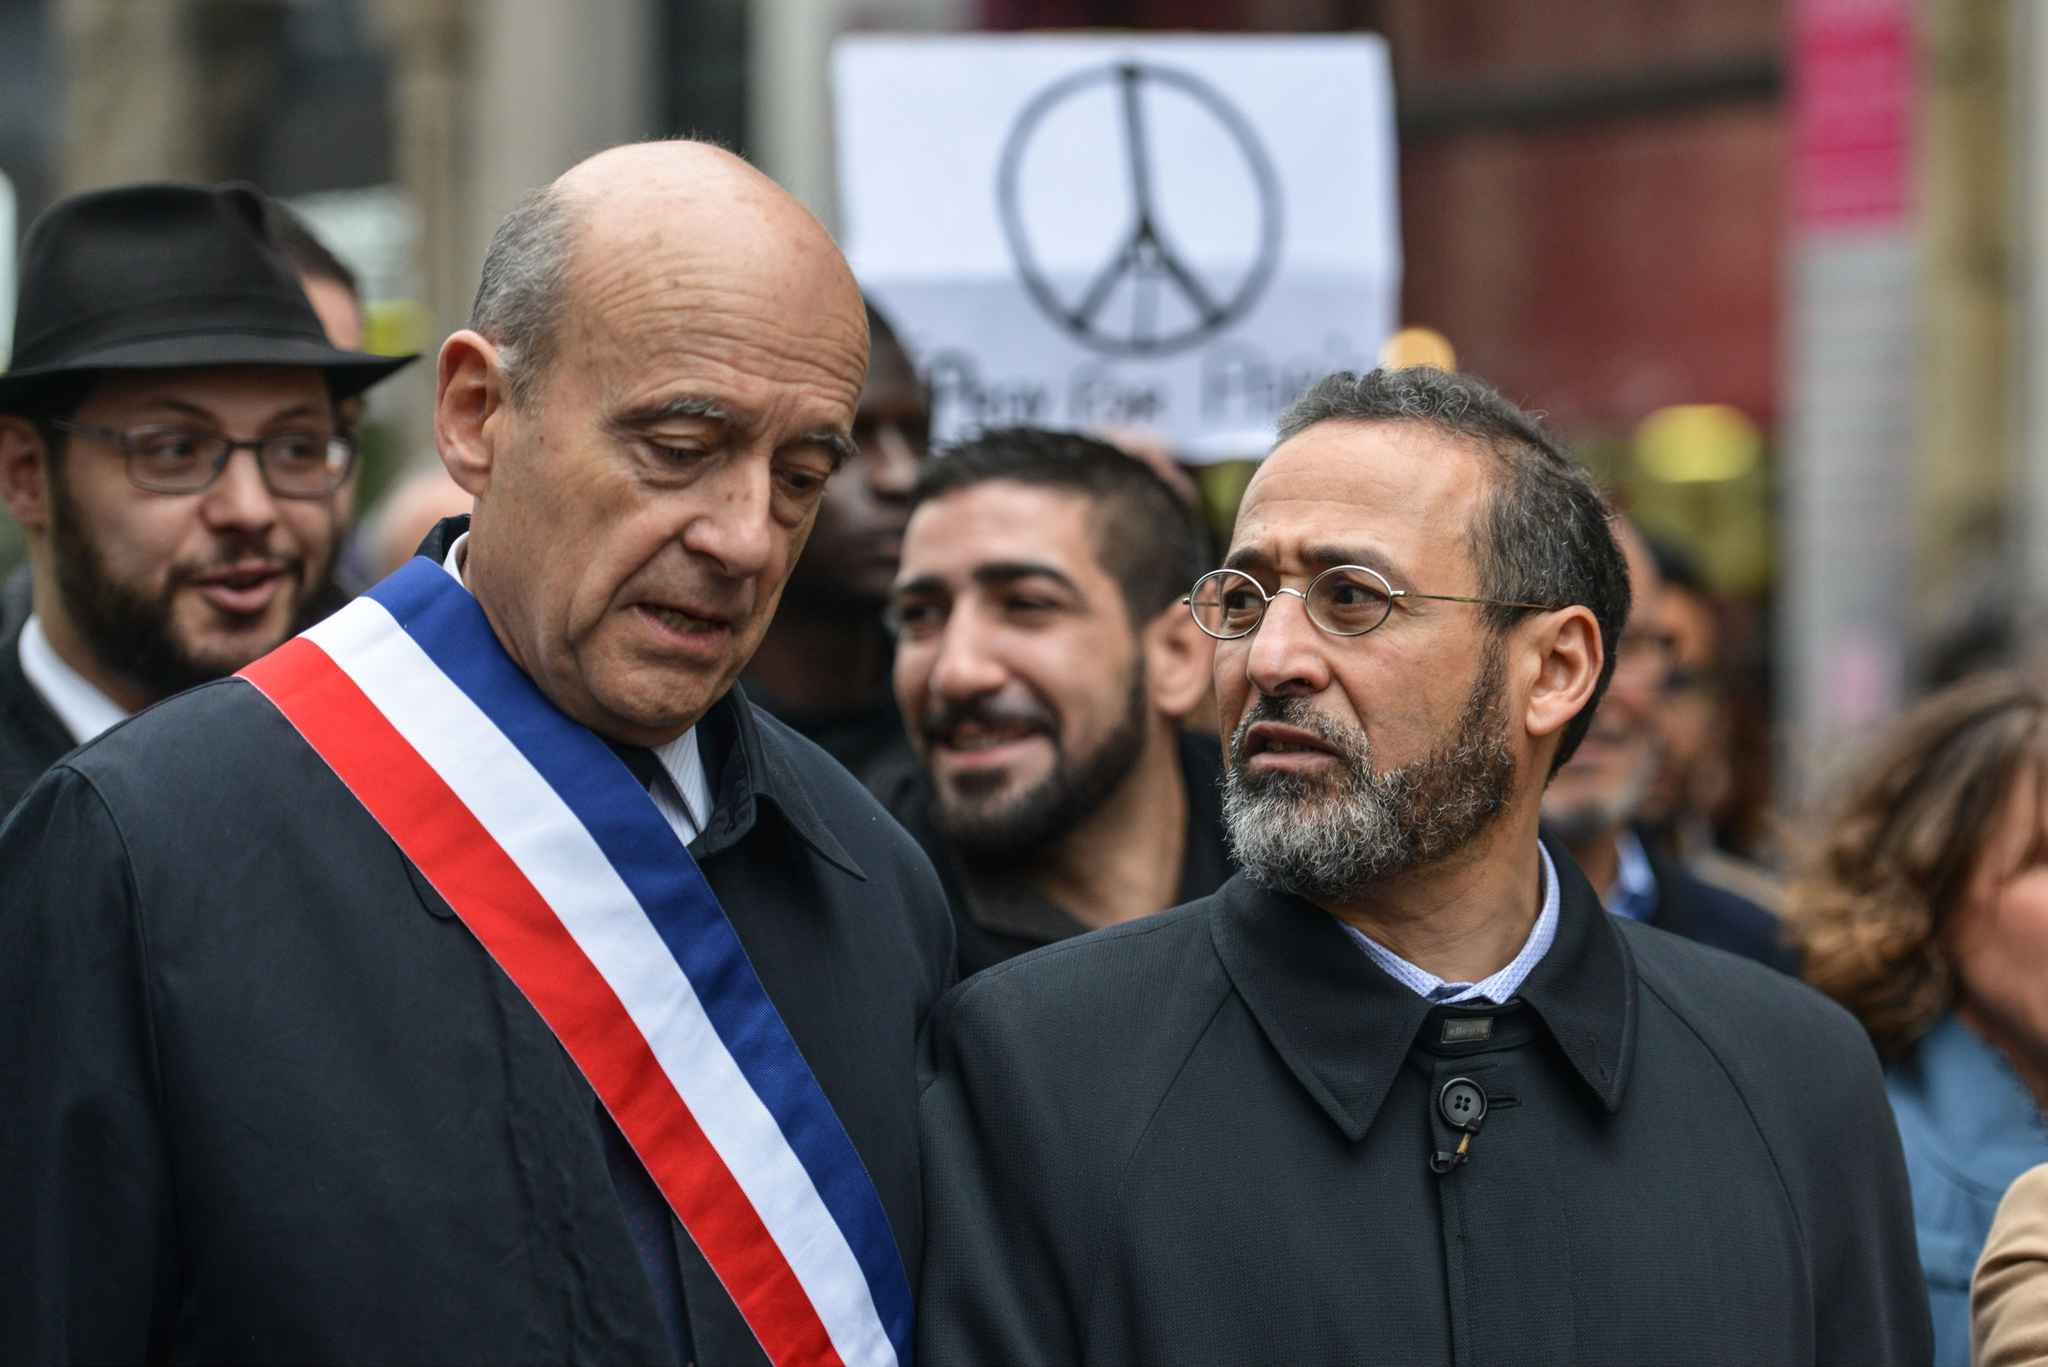 2048x1536-fit_french-imam-of-bordeaux-s-mosque-tareq-oubrou-and-mayor-of-bordeaux-alain-juppe-attend-a-gathering